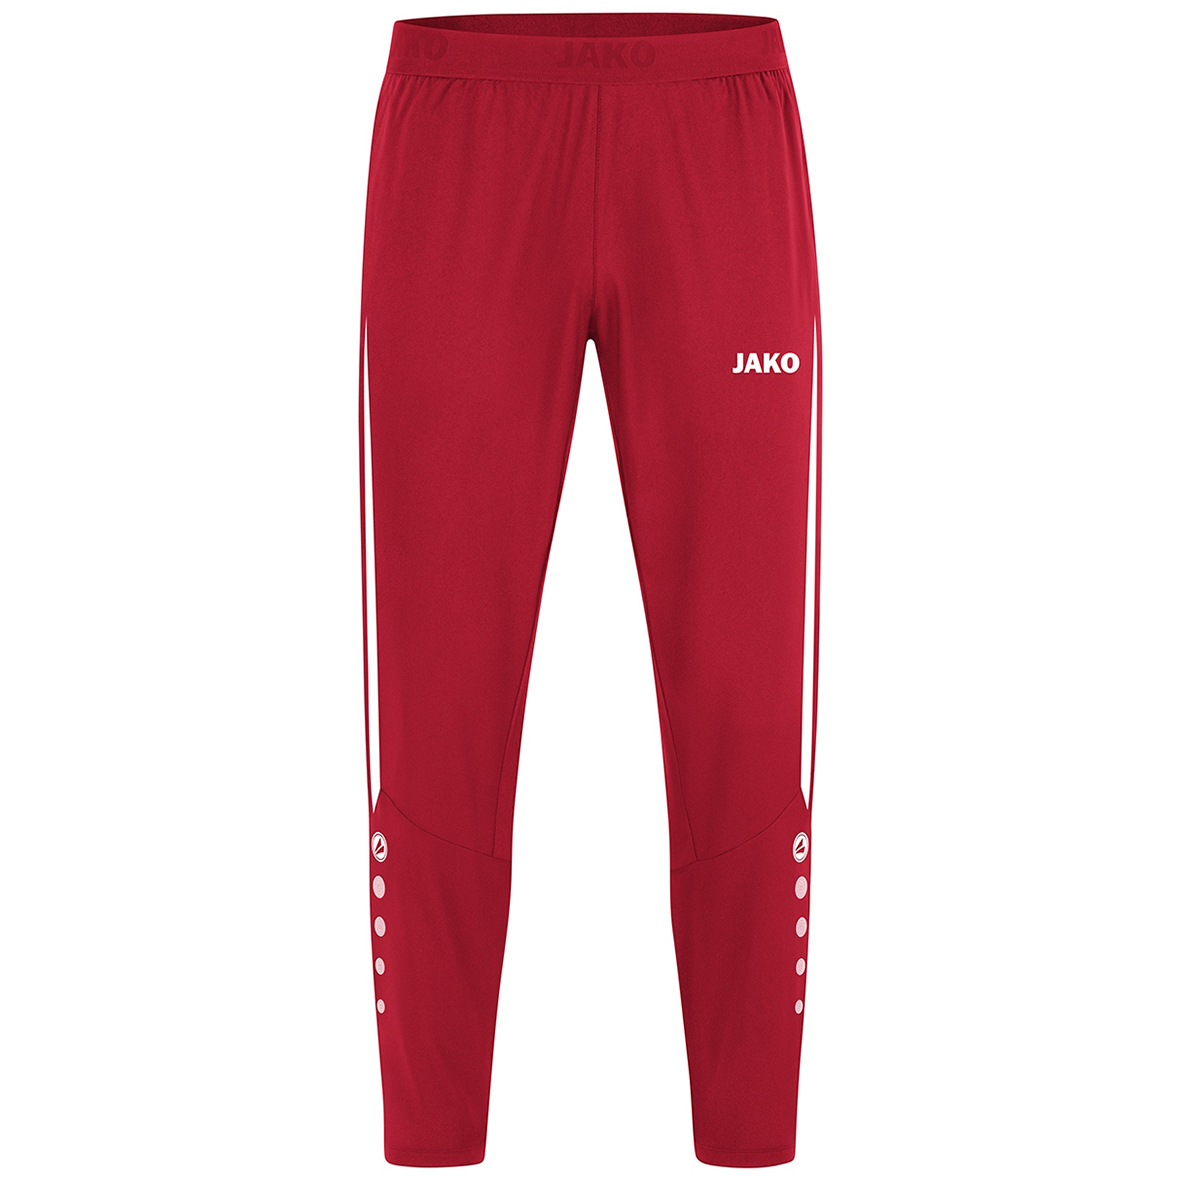 JAKO POWER LEISURE TROUSERS, RED-WHITE KIDS.